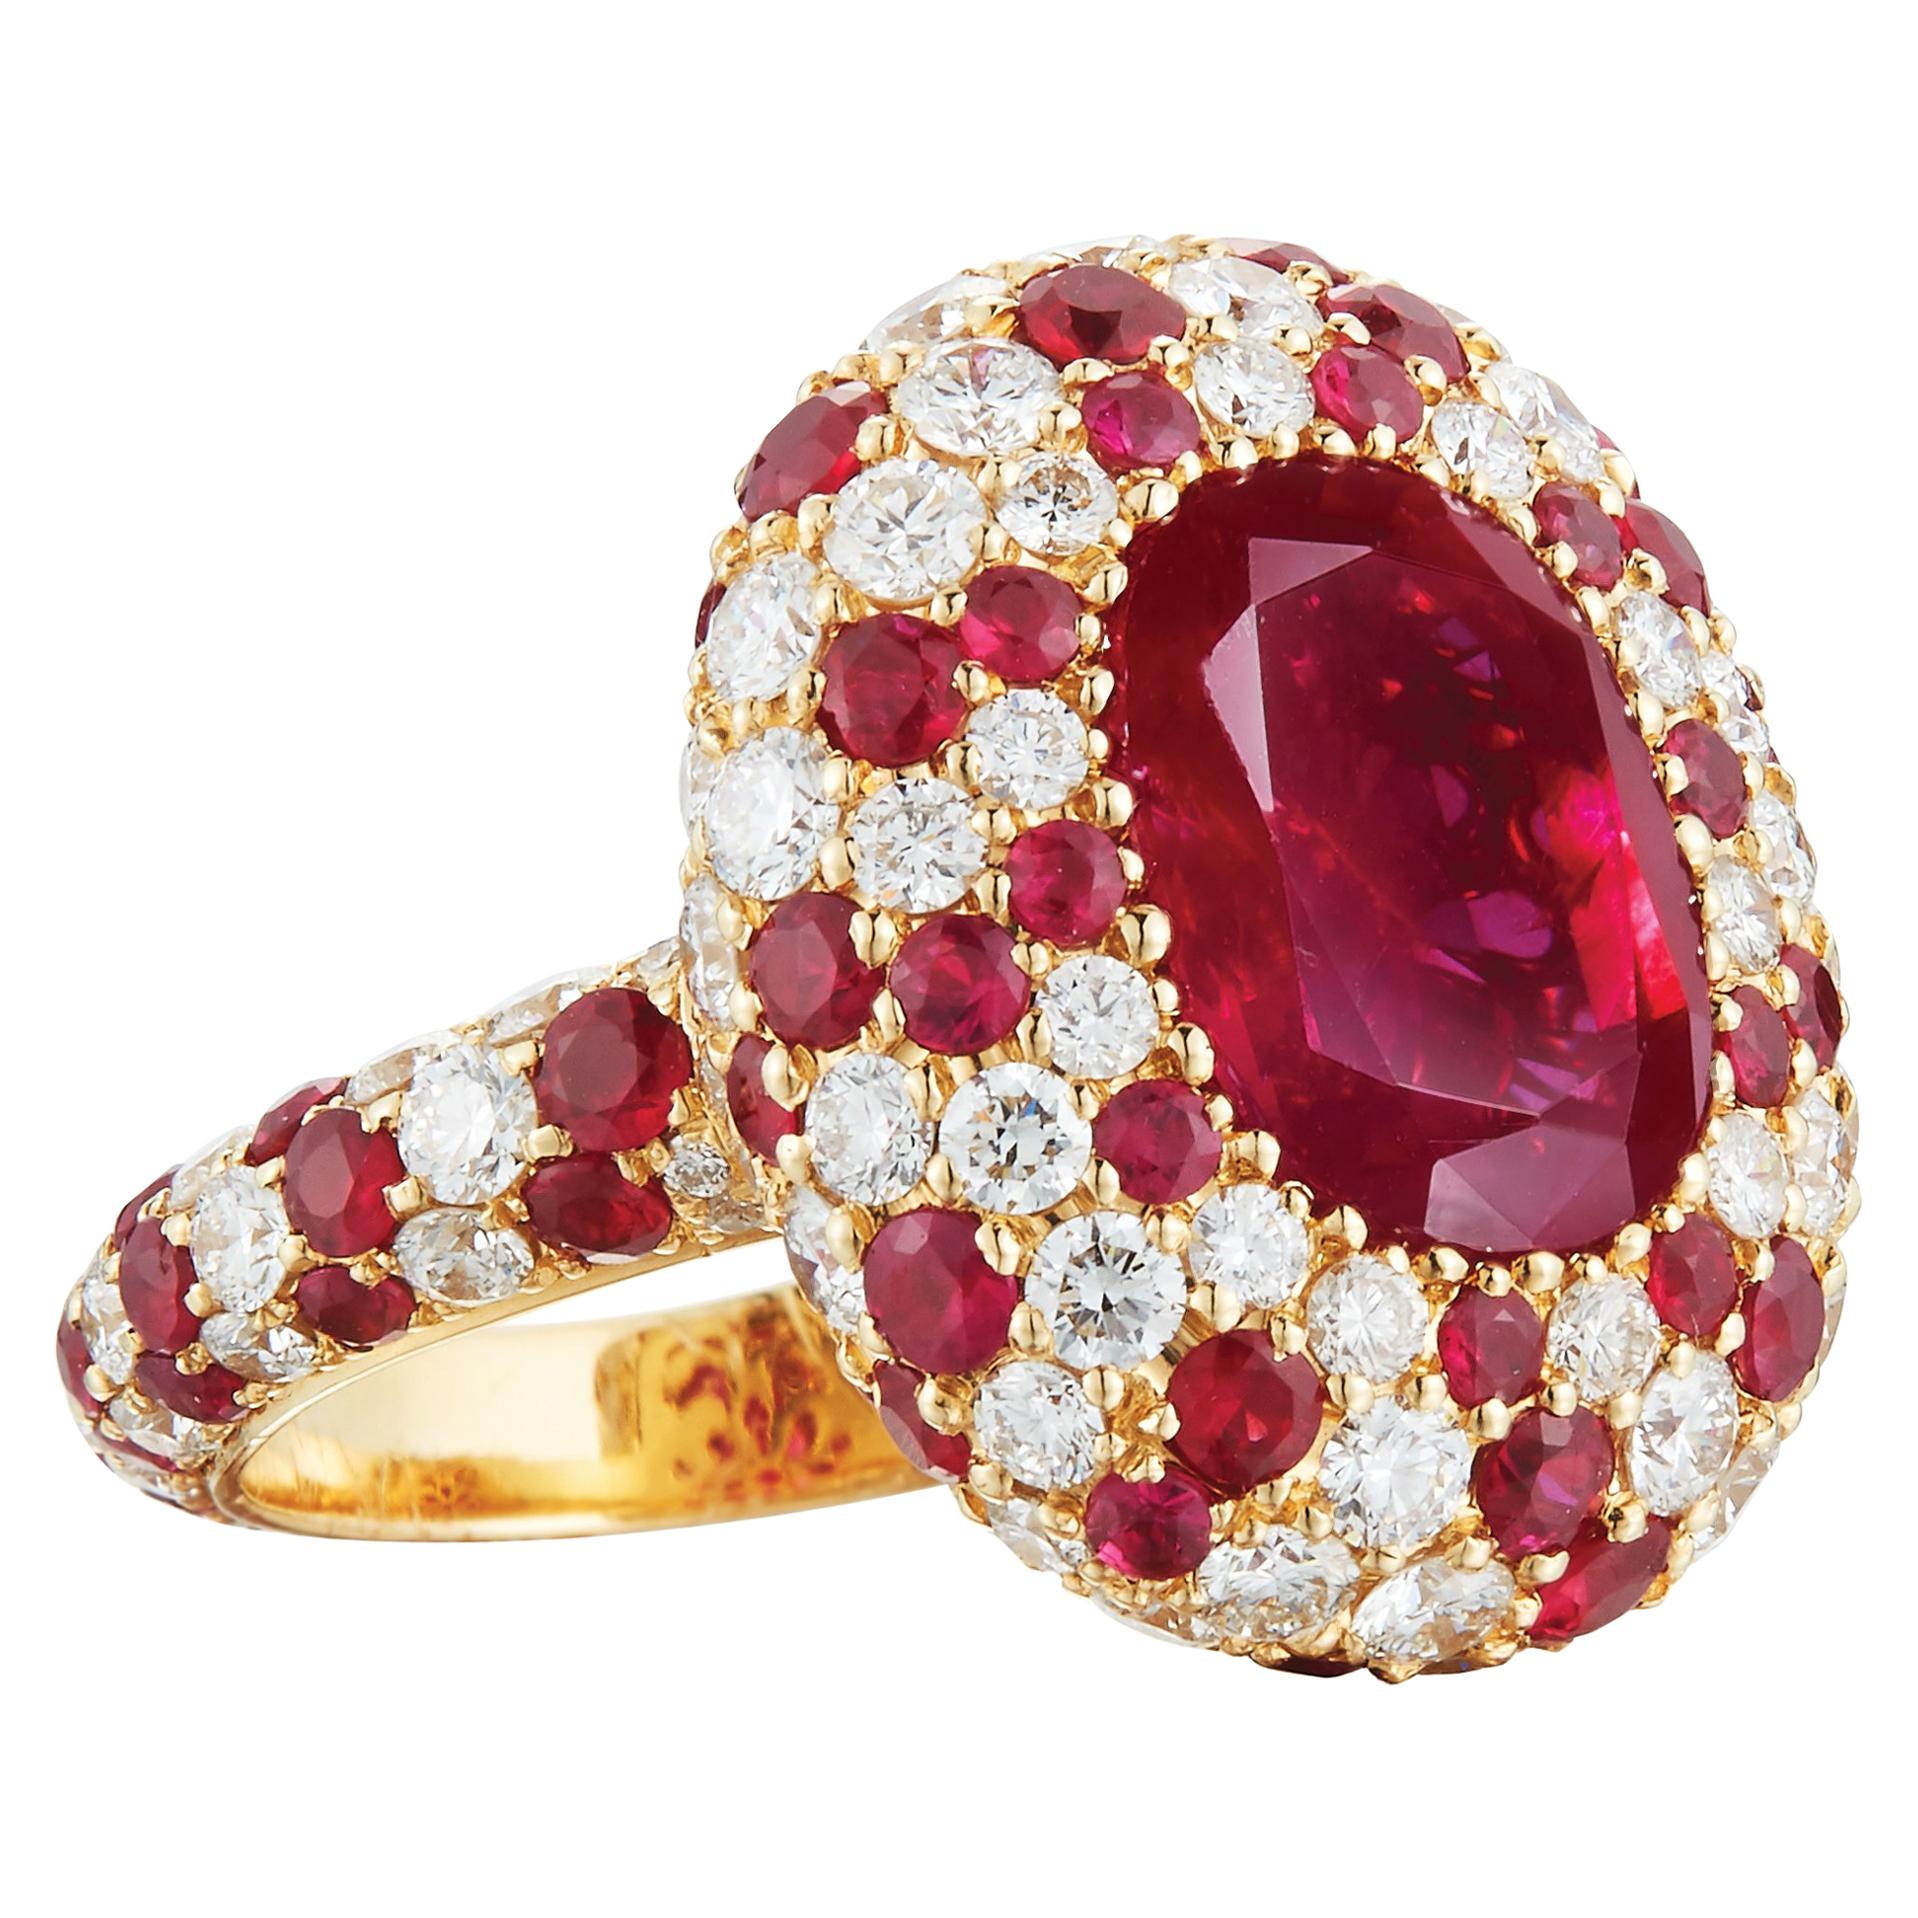 Fine Non-Heated Burma Ruby Ring Set with Diamonds and Rubies